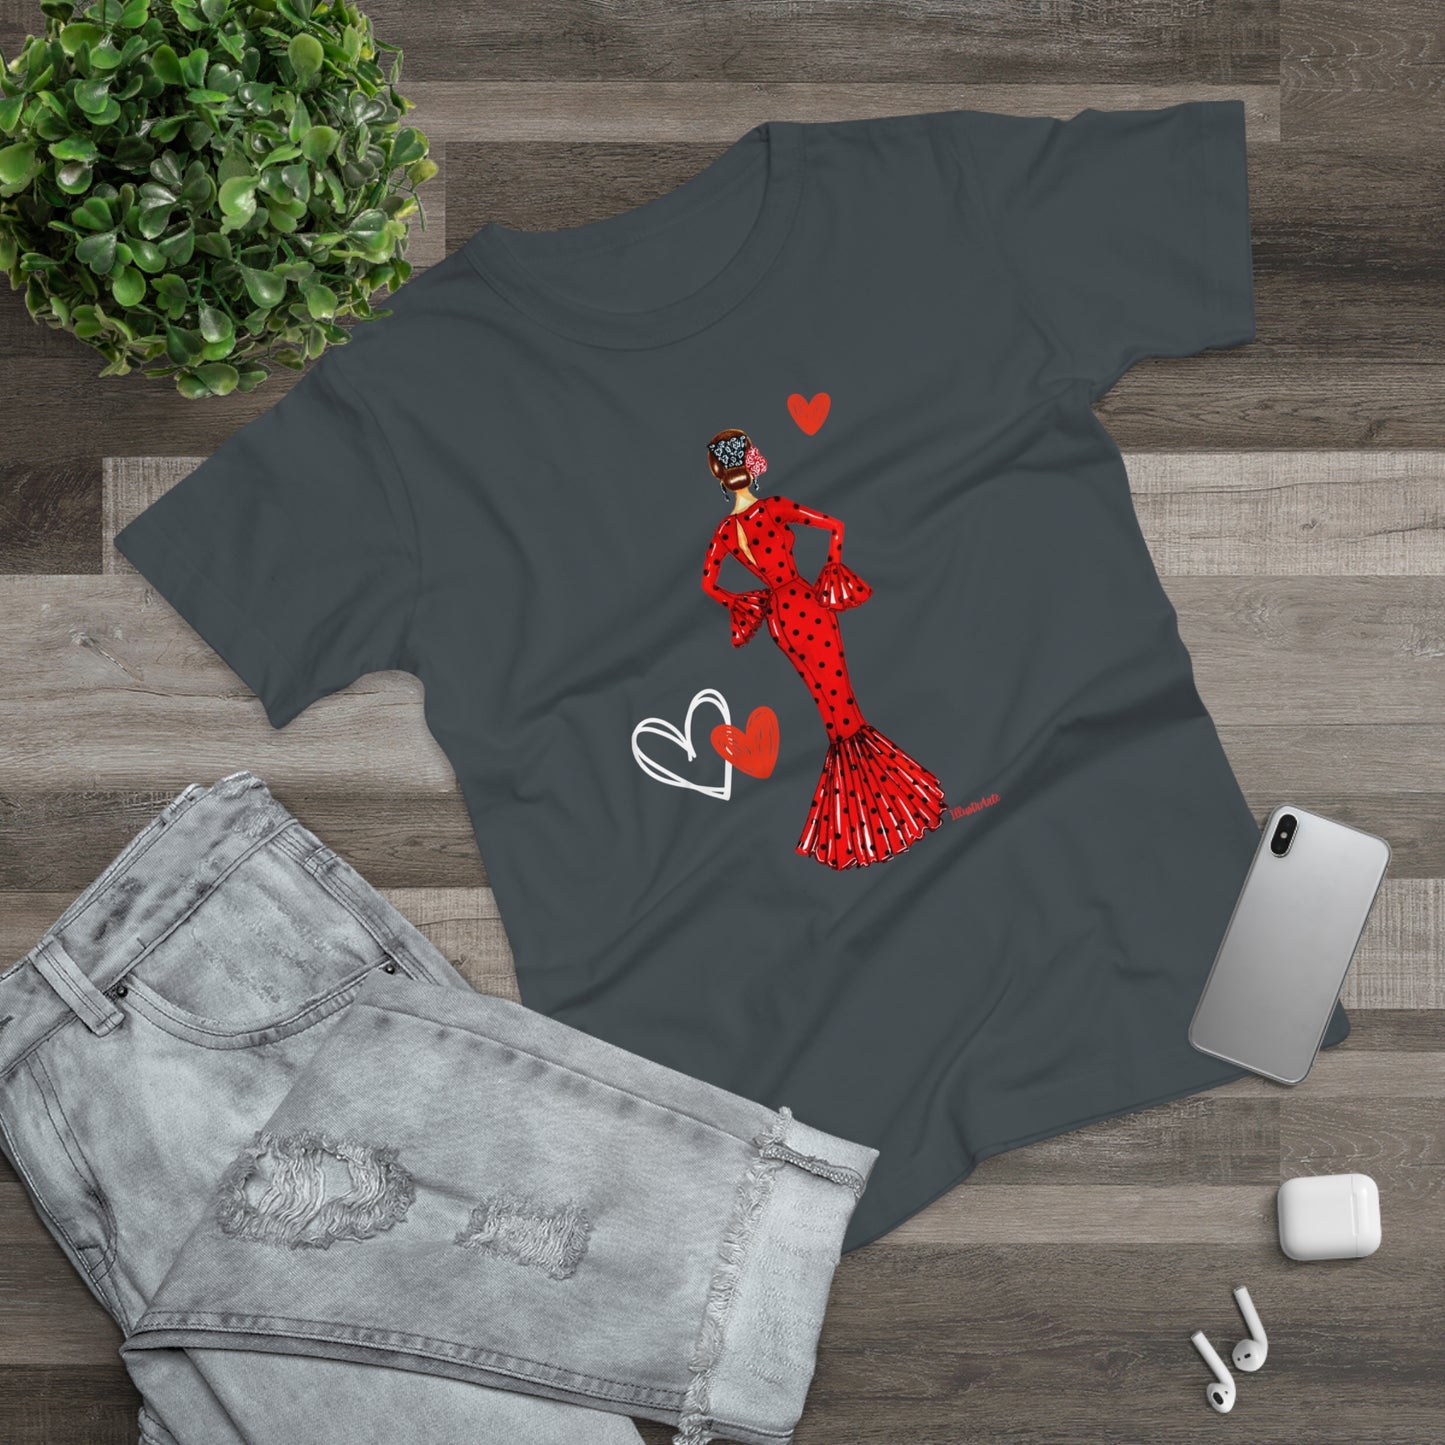 a t - shirt with a red dress and hearts on it